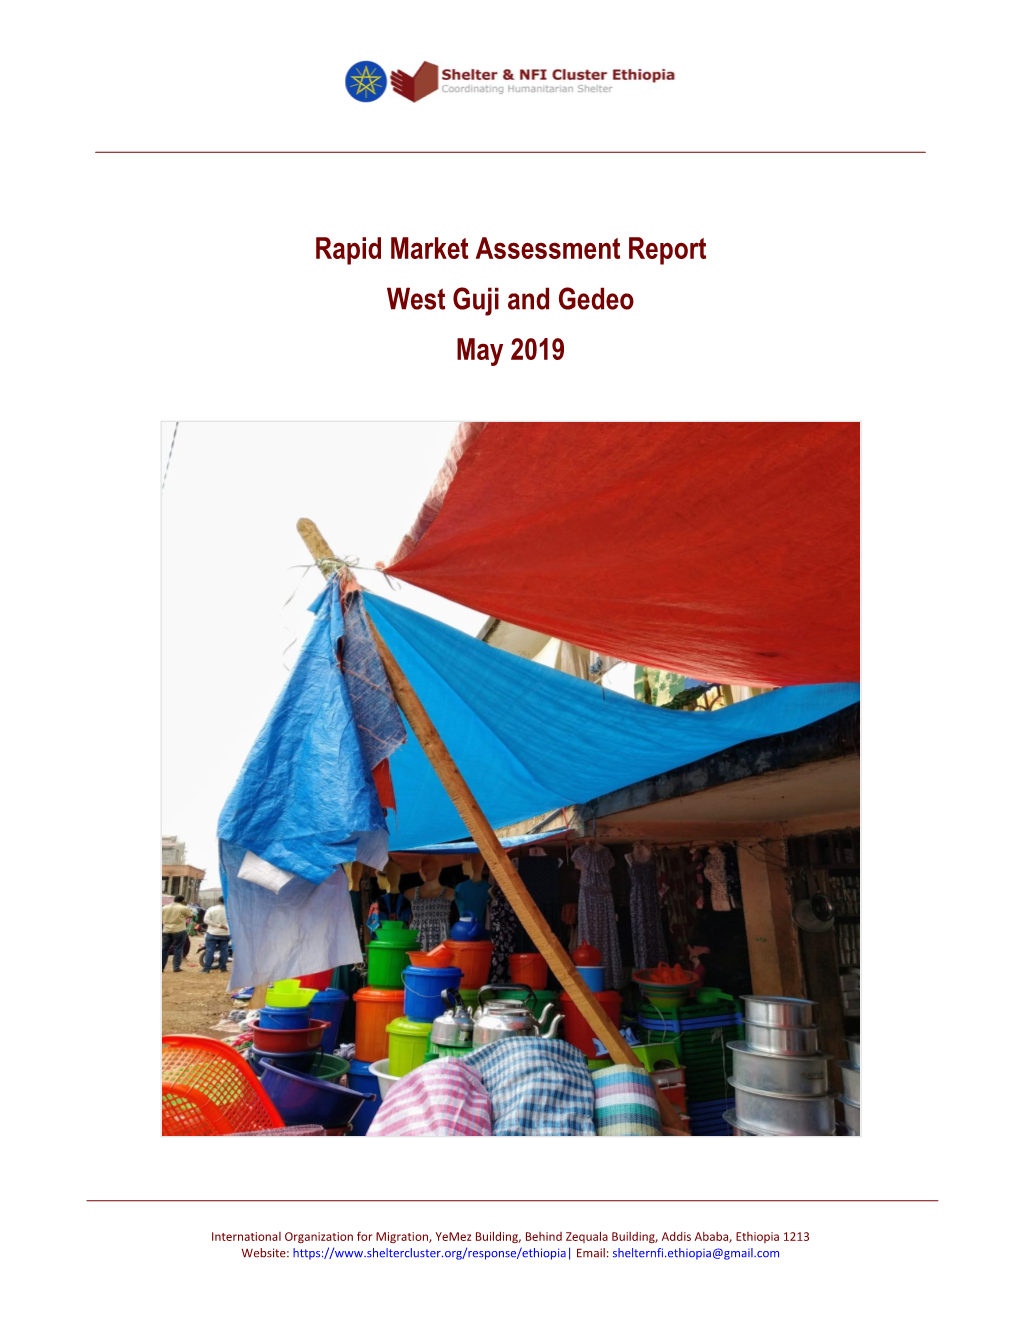 Rapid Market Assessment Report West Guji and Gedeo May 2019